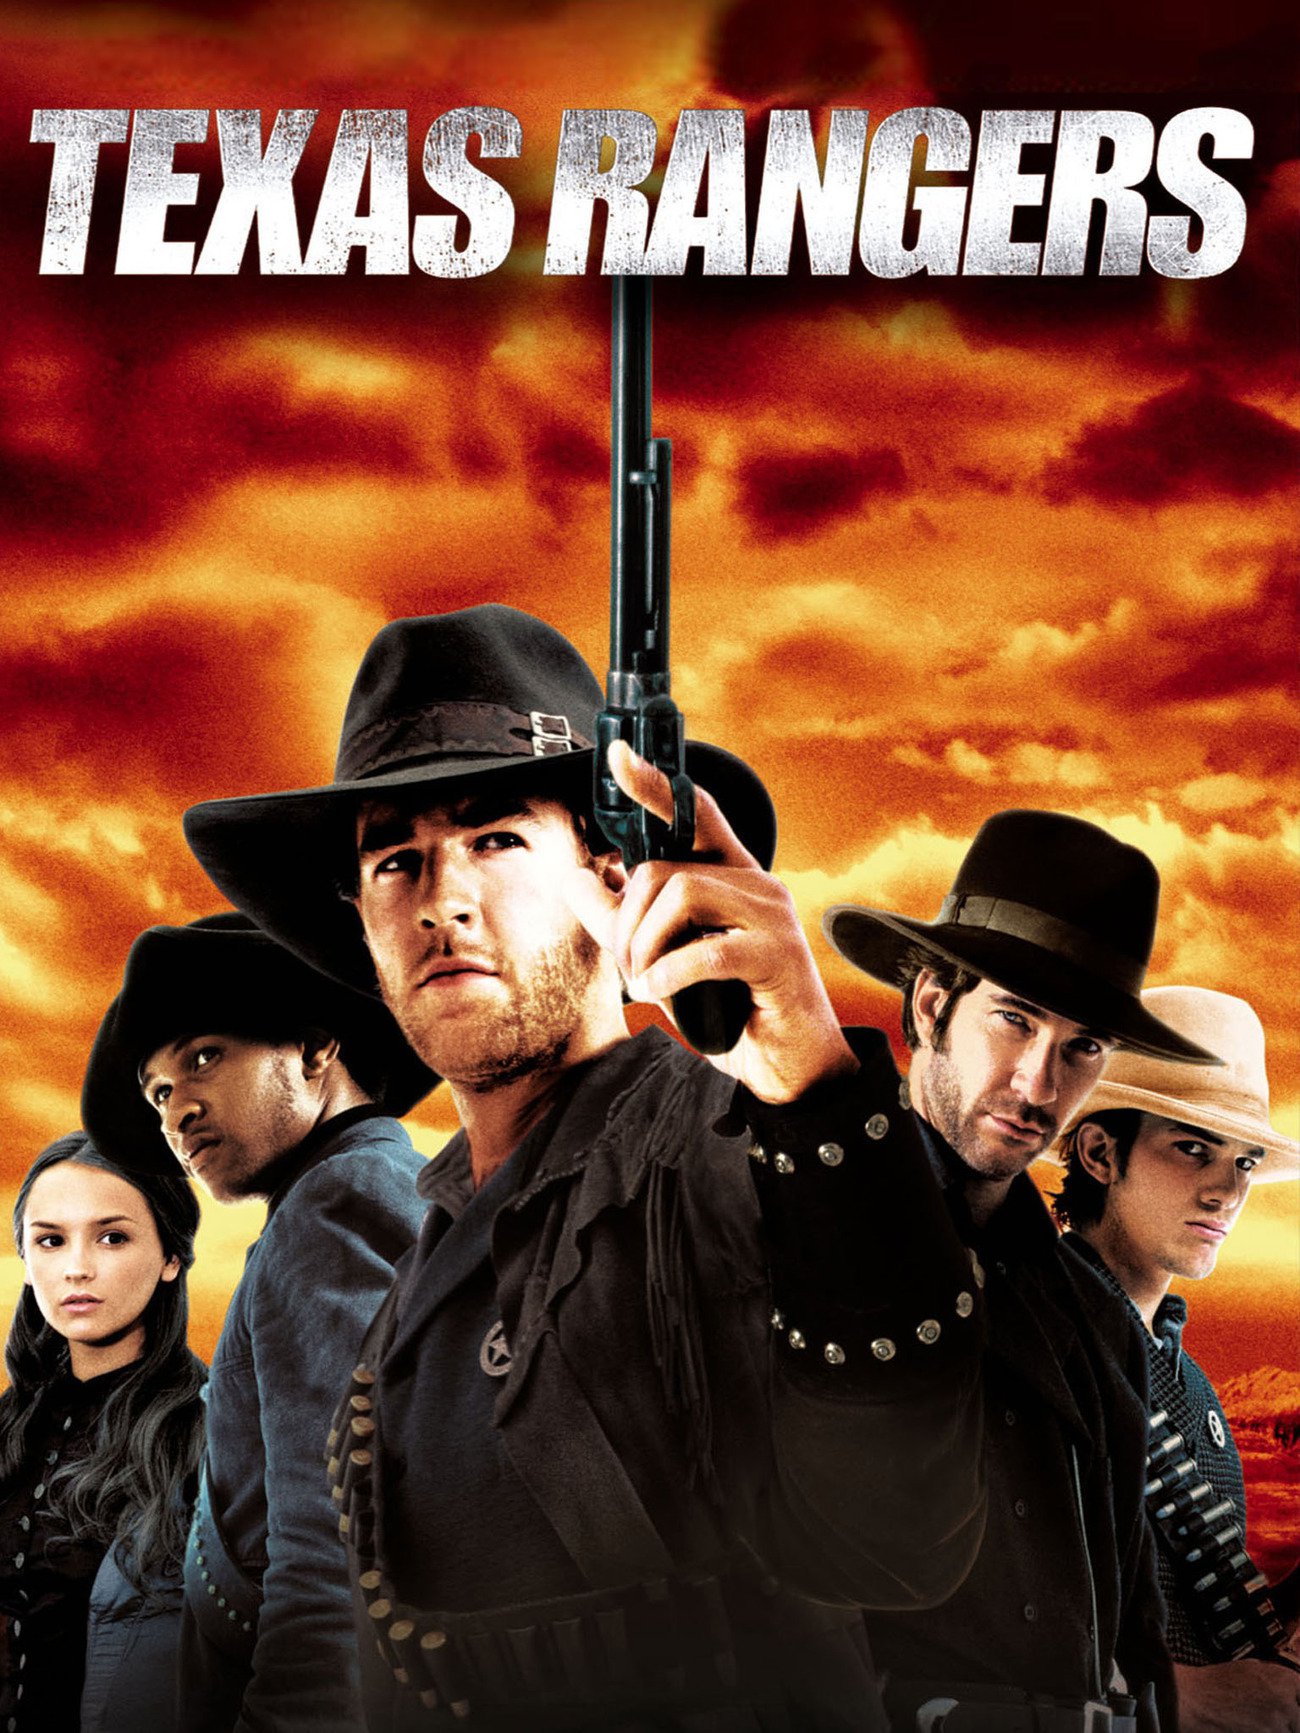 Poster for the movie "Texas Rangers"